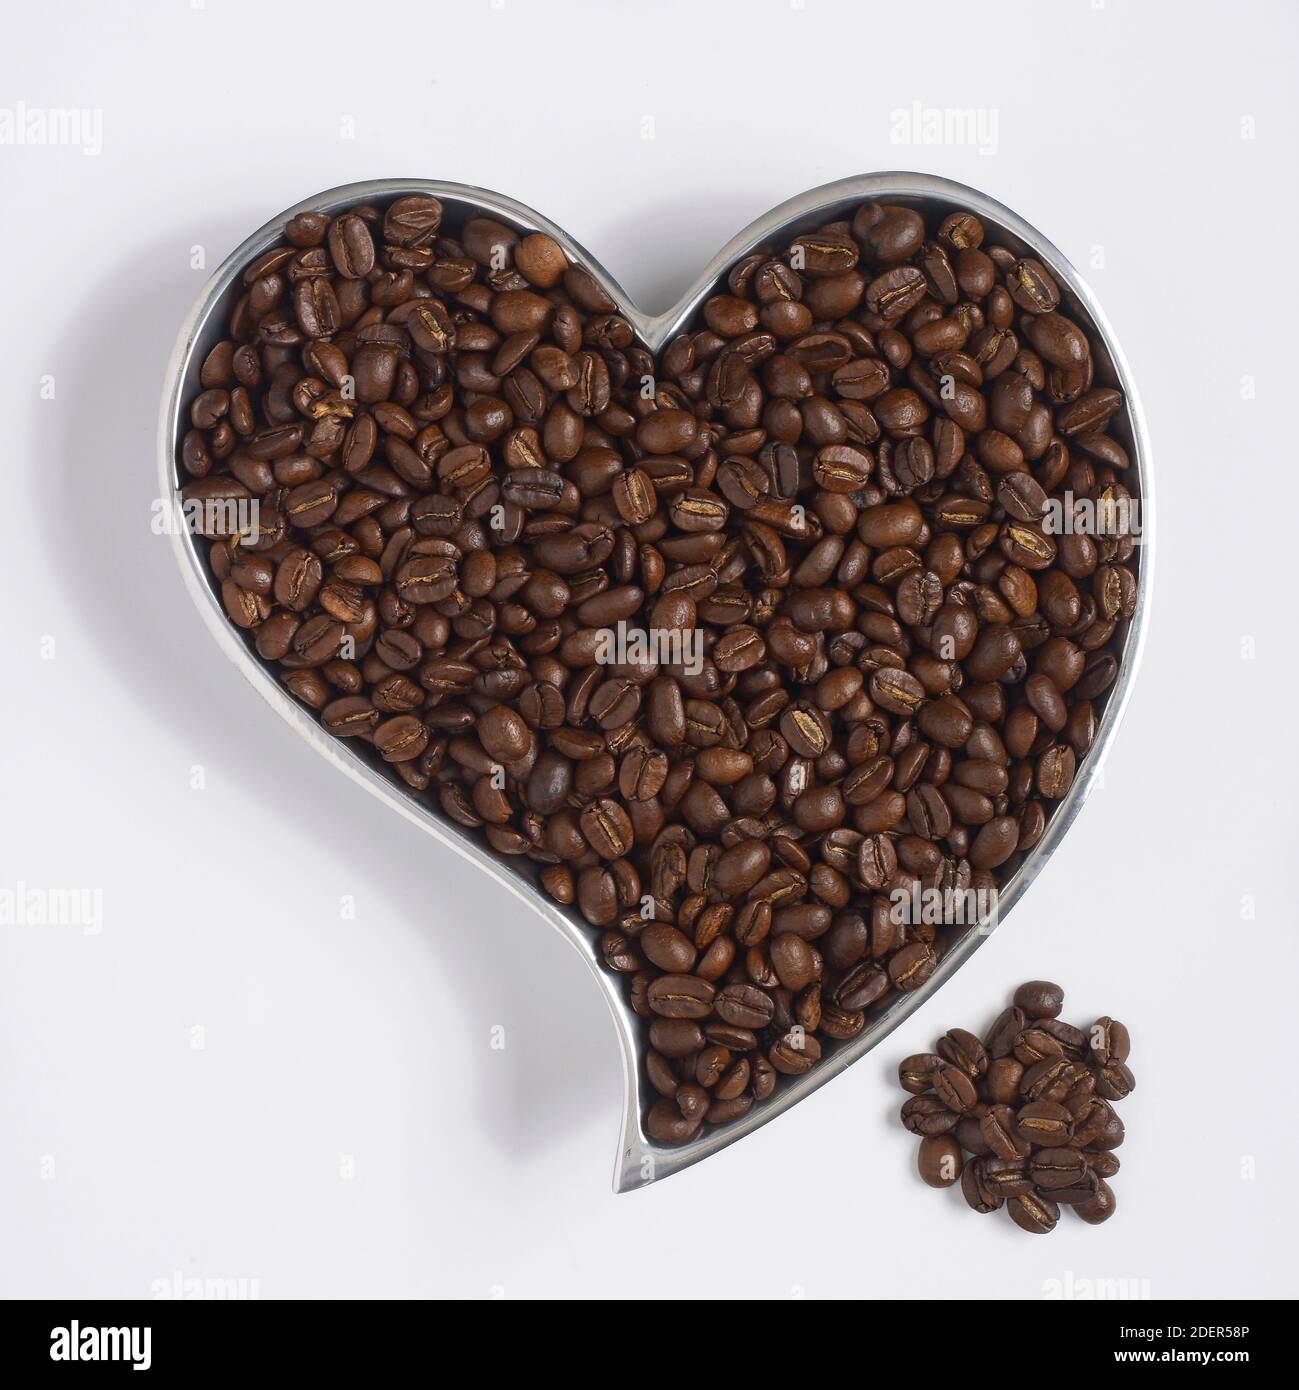 coffee beans in heart-shaped container Stock Photo